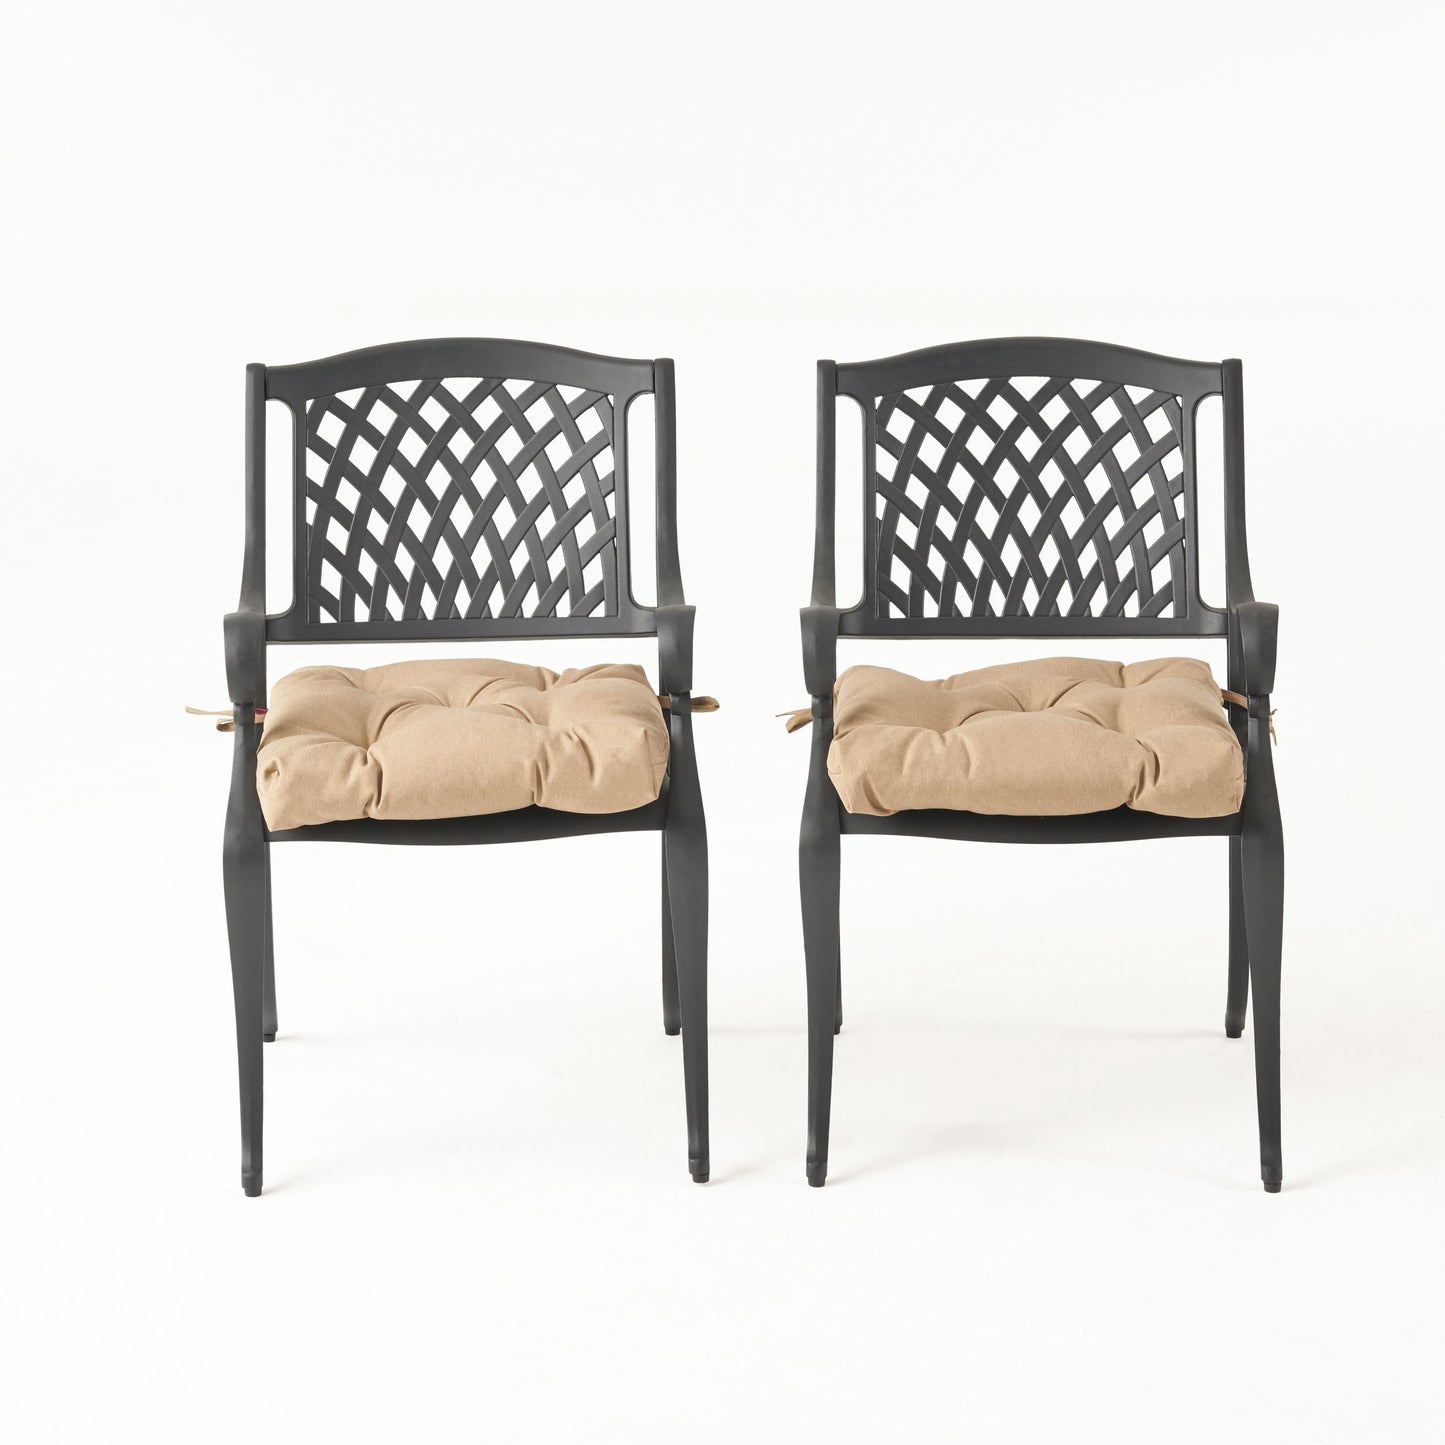 Hallandale Outdoor Dining Chair with Cushion (Set of 2)